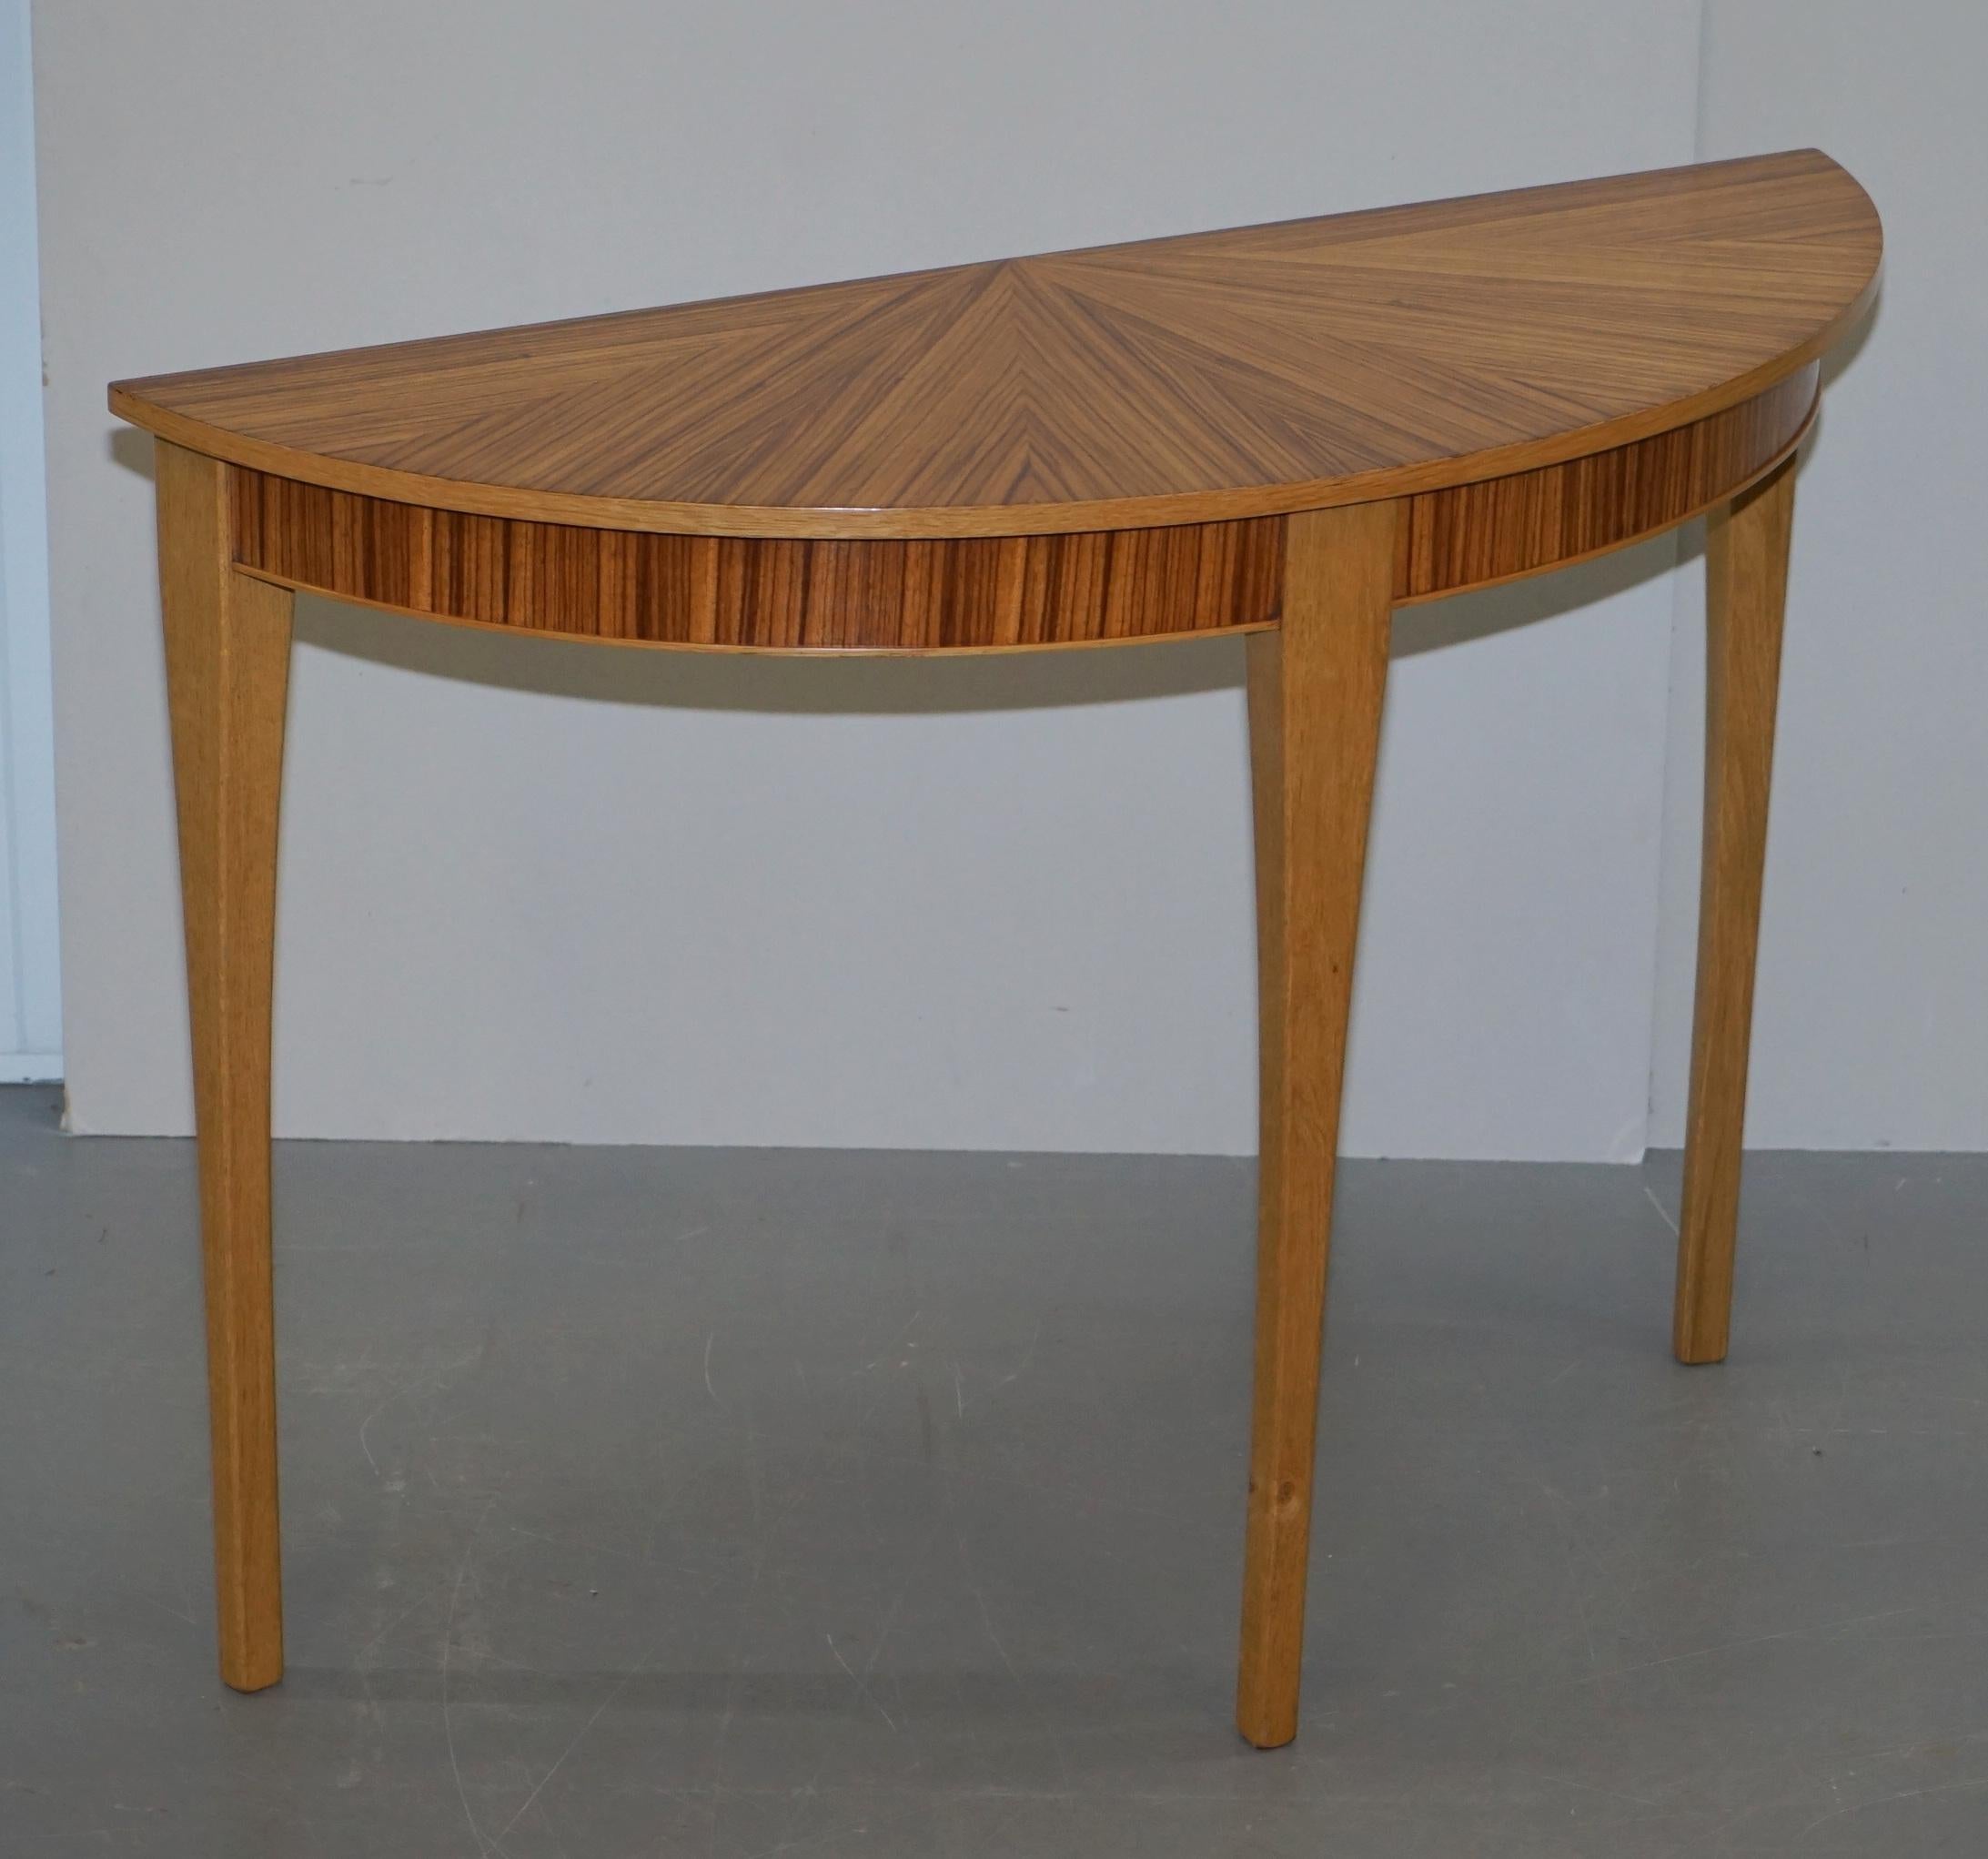 We are delighted to offer for sale this stunning matched pair of new Bevan Funnell Phoenix Zebrano wood demilune console tables

They are new, ex shop display stock, they have some light transport marks around the edges here and there

These are